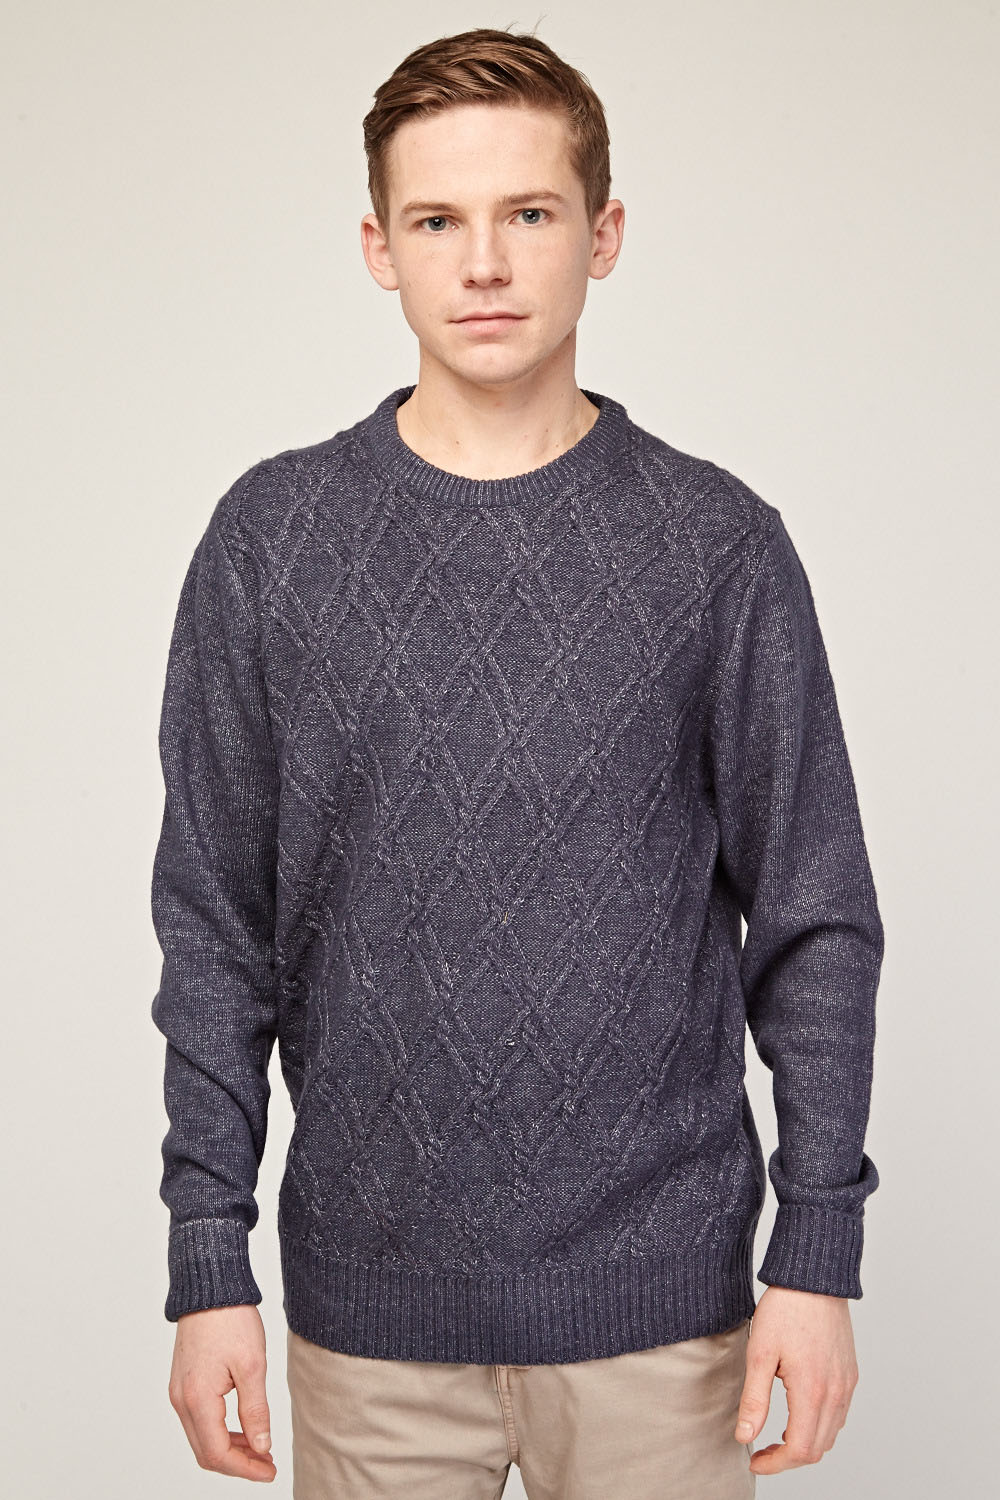 Diamond Patterned Textured Knit Jumper - Green or Middle Blue - Just £5